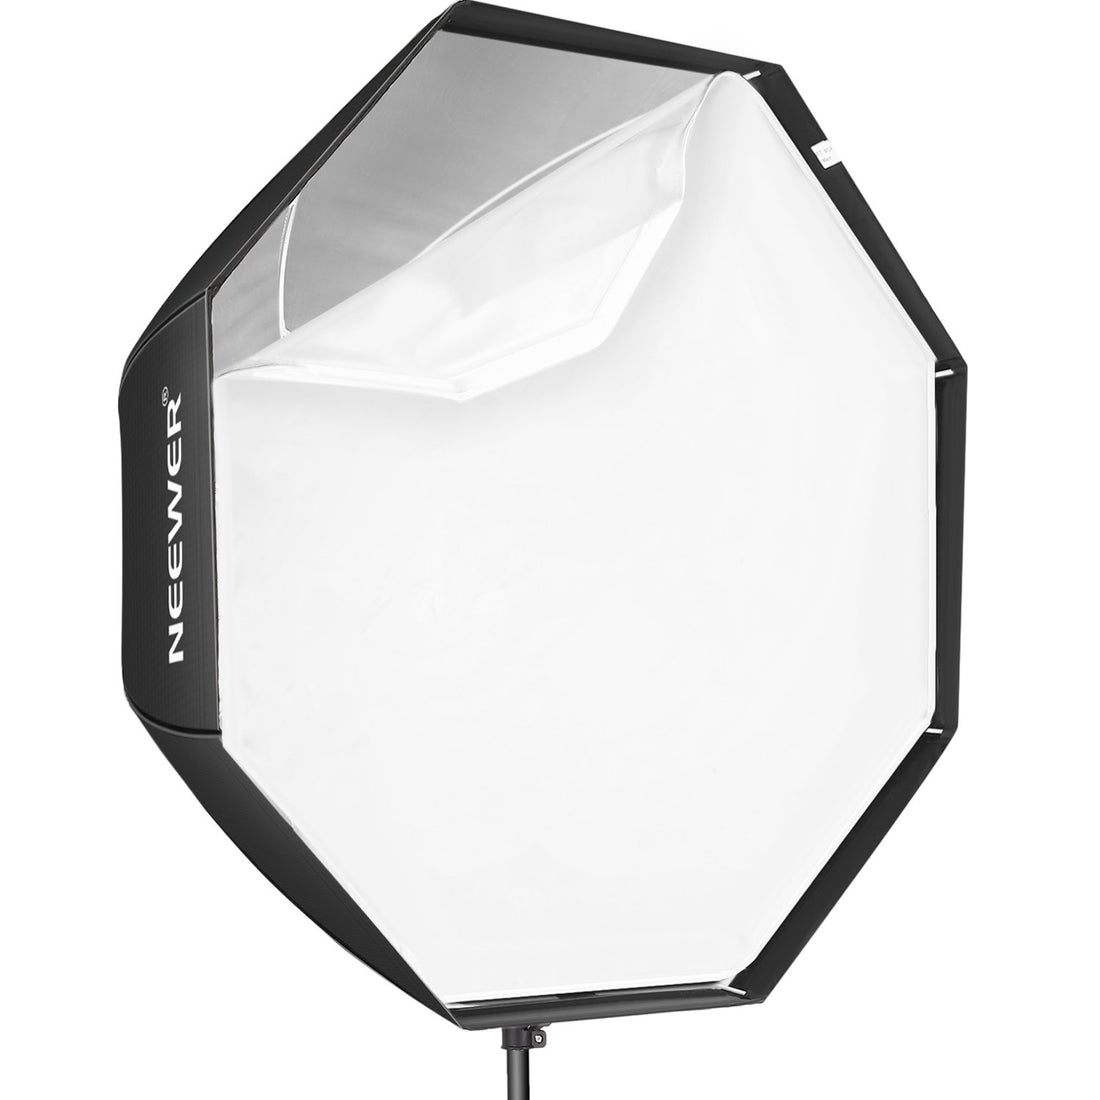 Neewer 32 inches /80 centimeters Octagon Softbox Octagonal Speedlite, Studio Flash, Speedlight Umbrella Softbox with Carrying Bag for Portrait or Product Photography